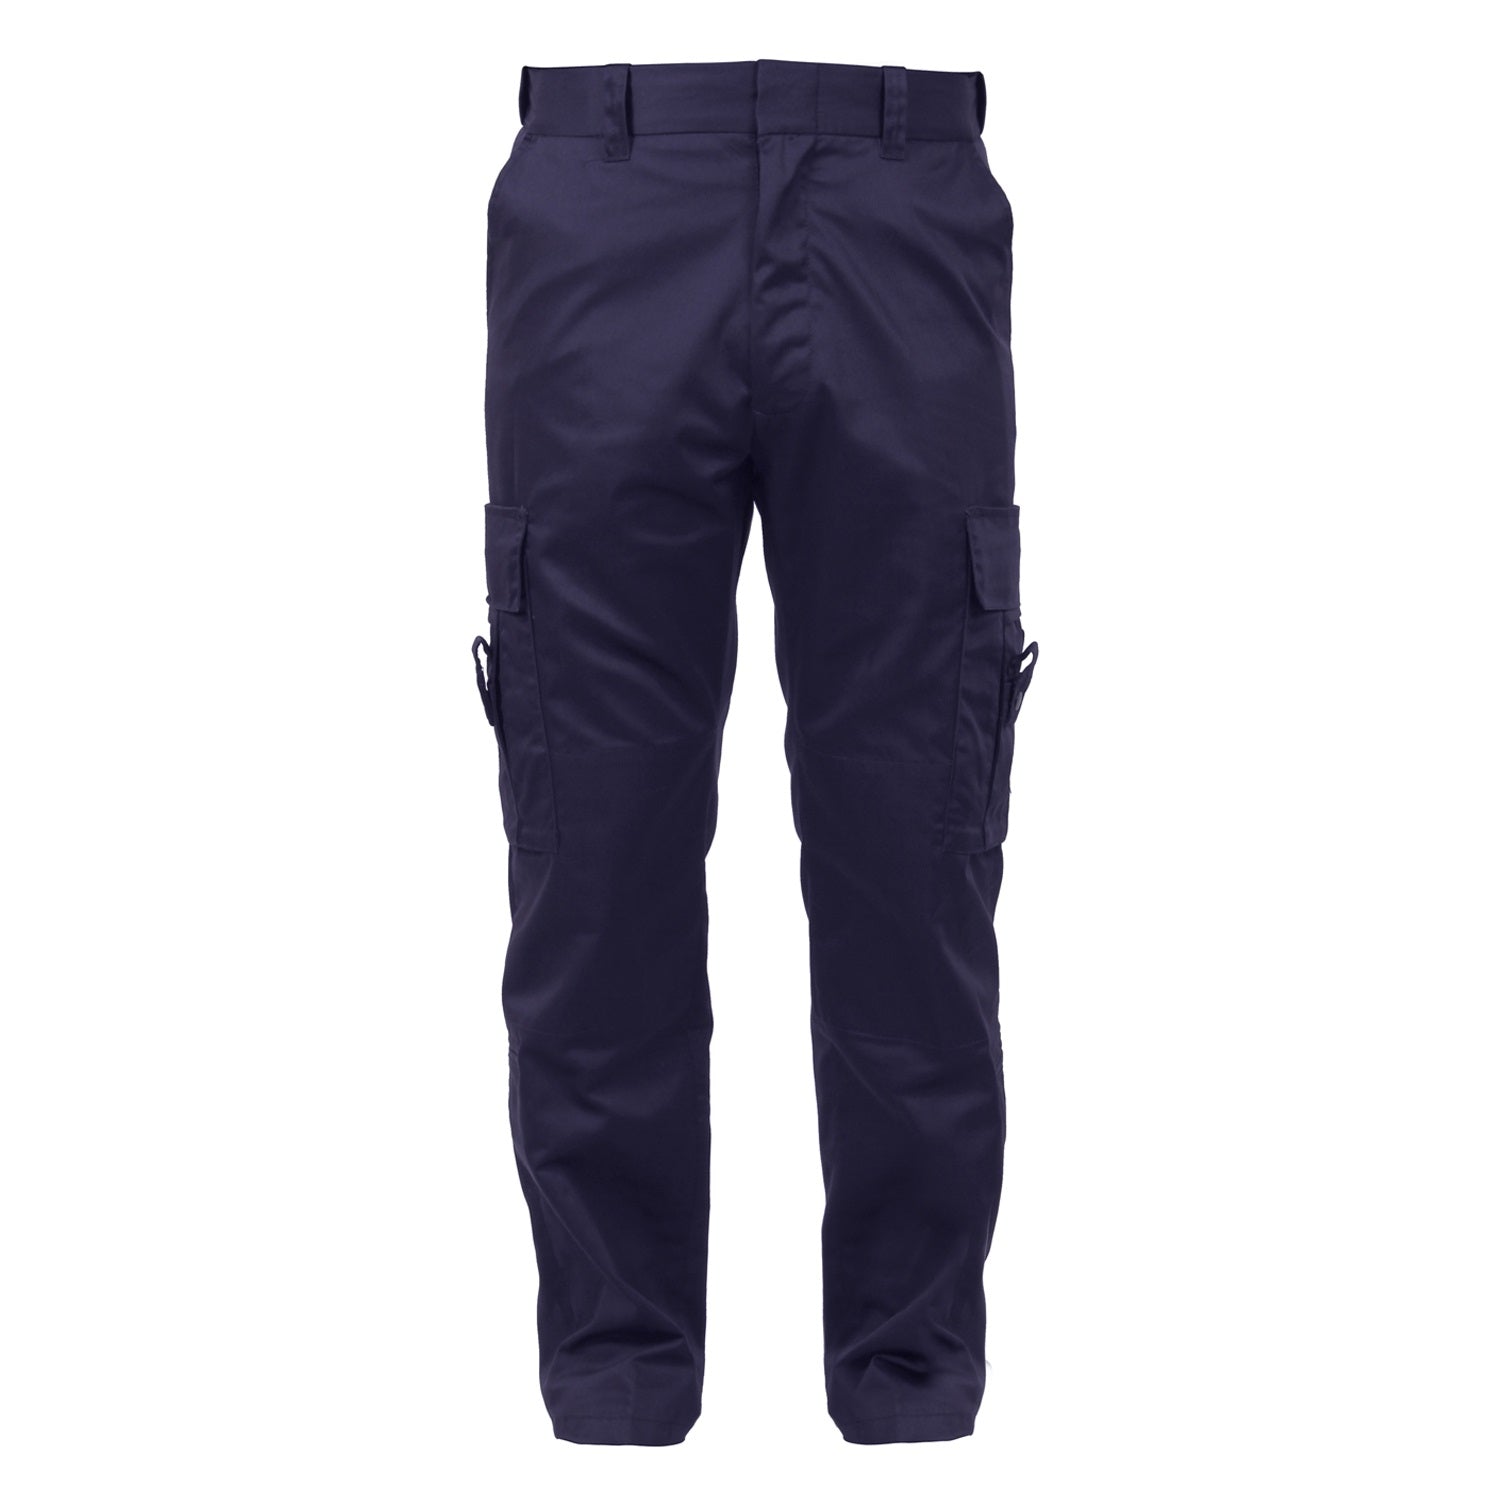 Rothco Deluxe EMT Pants Navy Blue